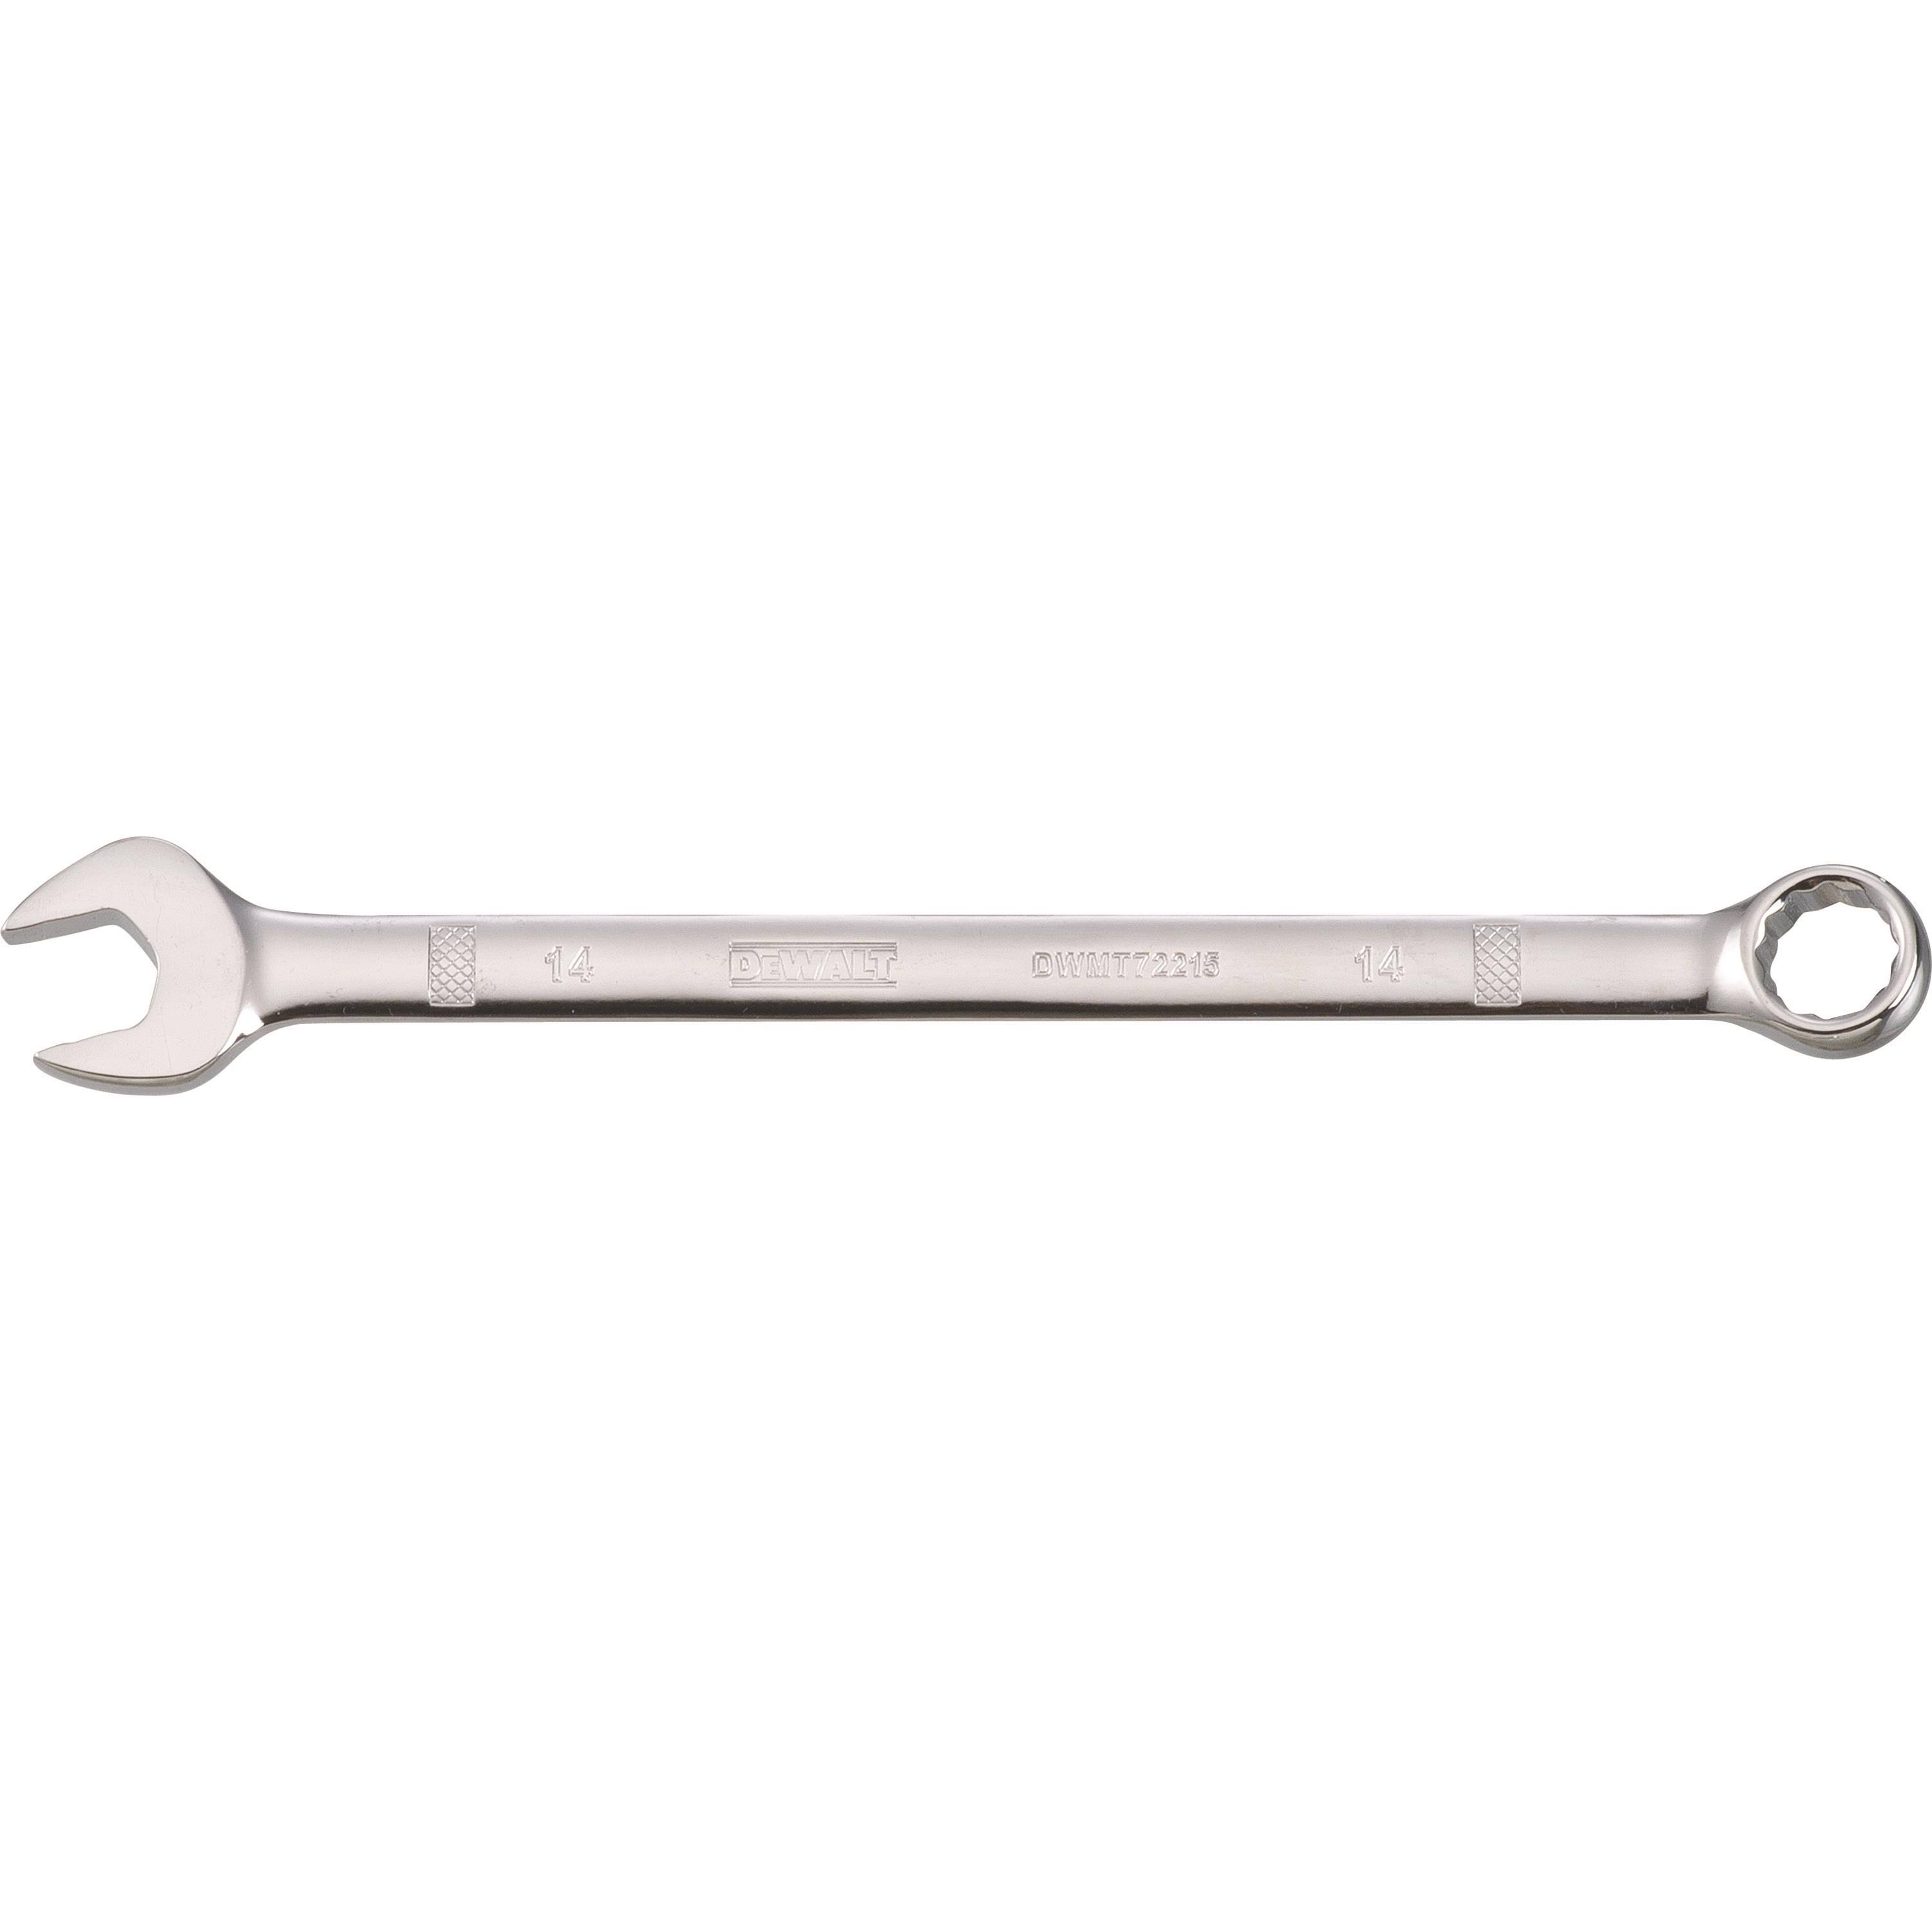 Stanley Tools Combination Wrench - 14mm, 12in